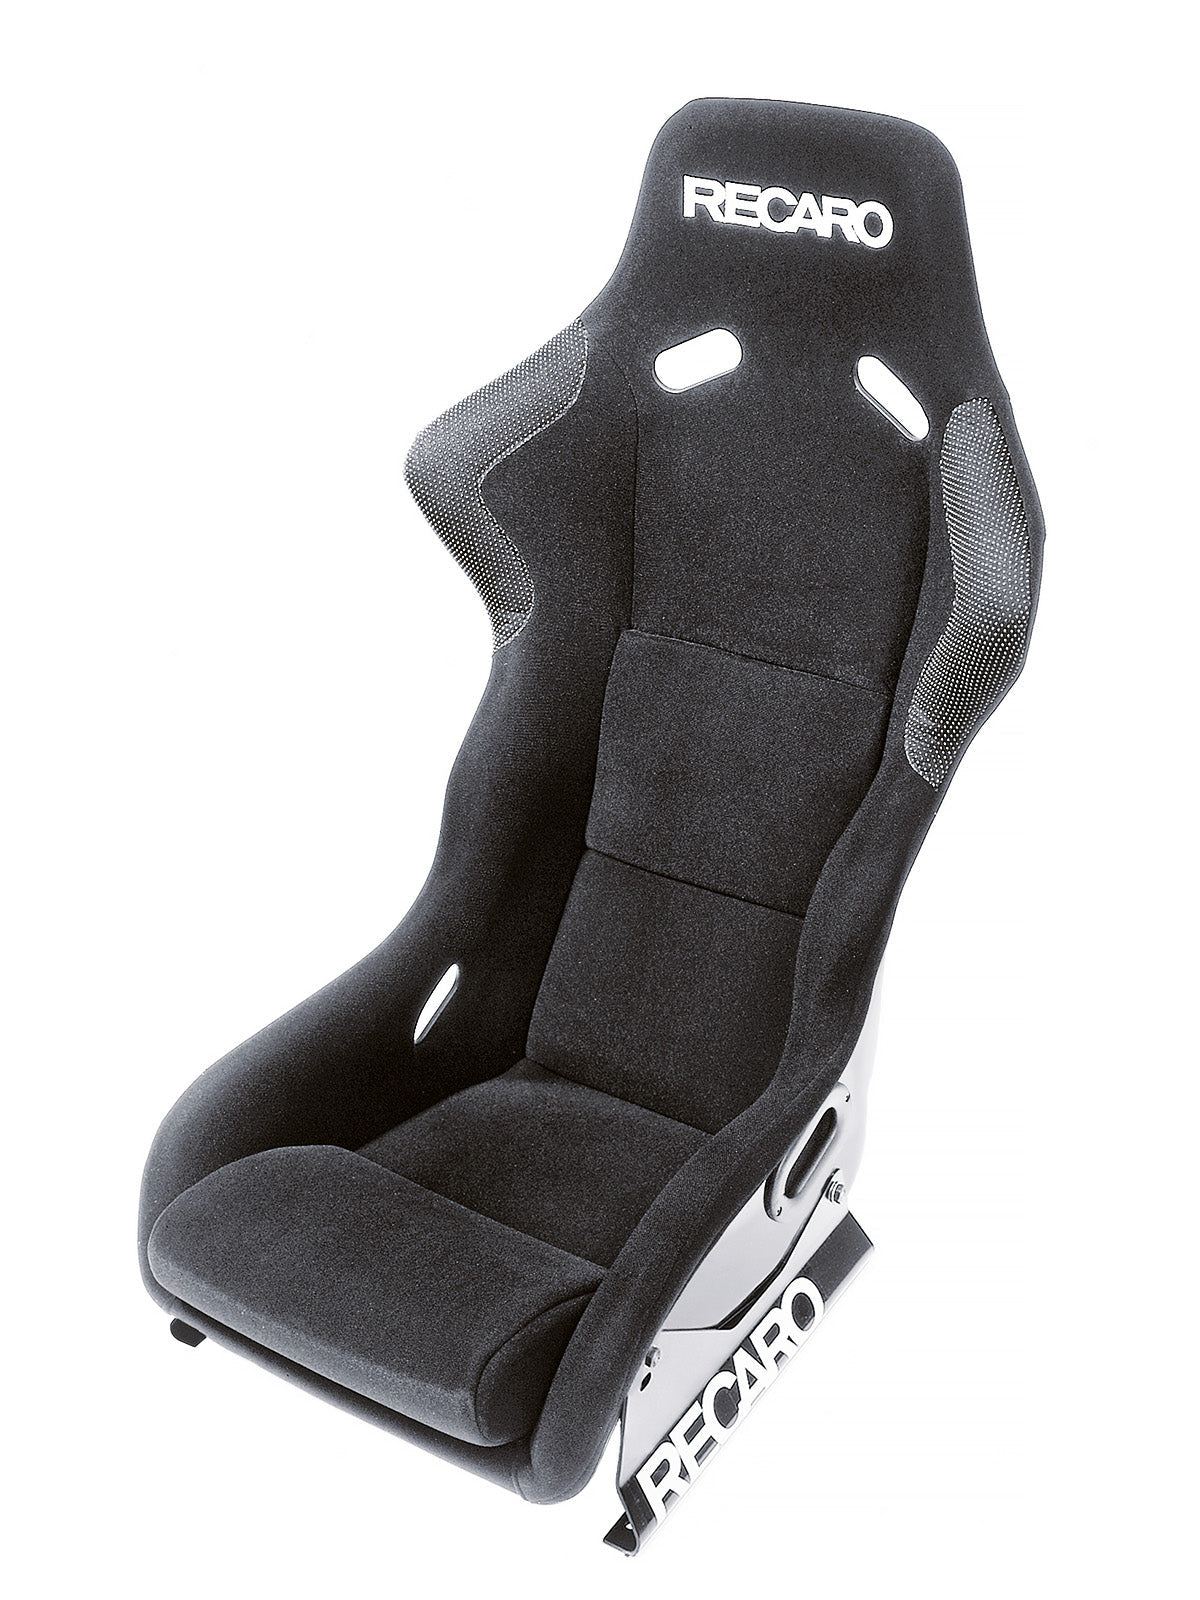 Recaro Profi SPG Racing Seat: A high-performance throne for motorsport enthusiasts, designed for speed and comfort.